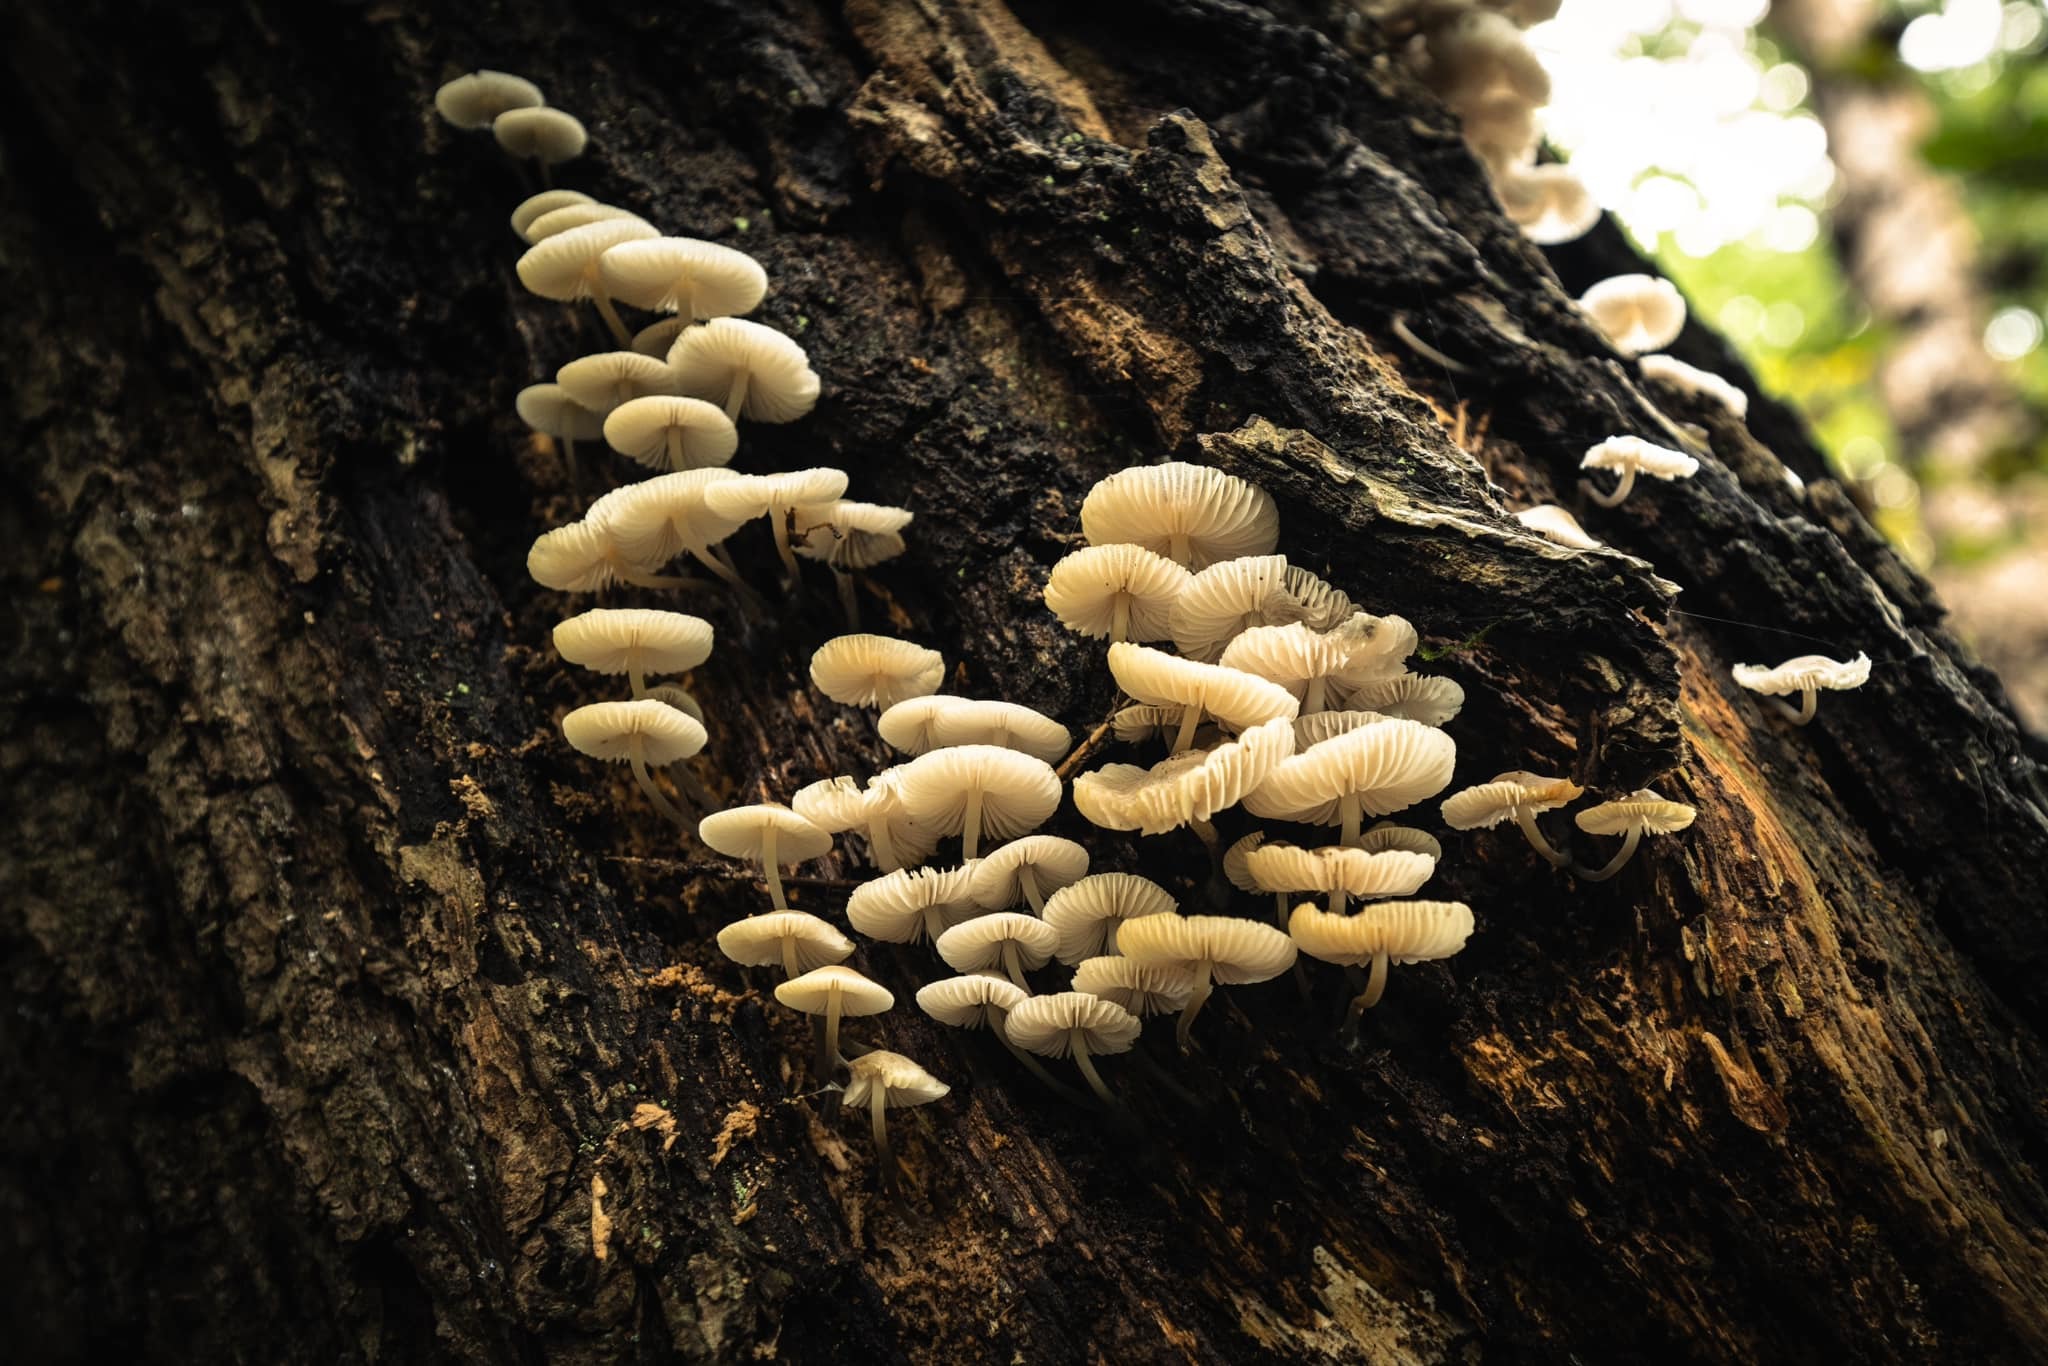 Fall funghi at Marbury Park by Imagewich